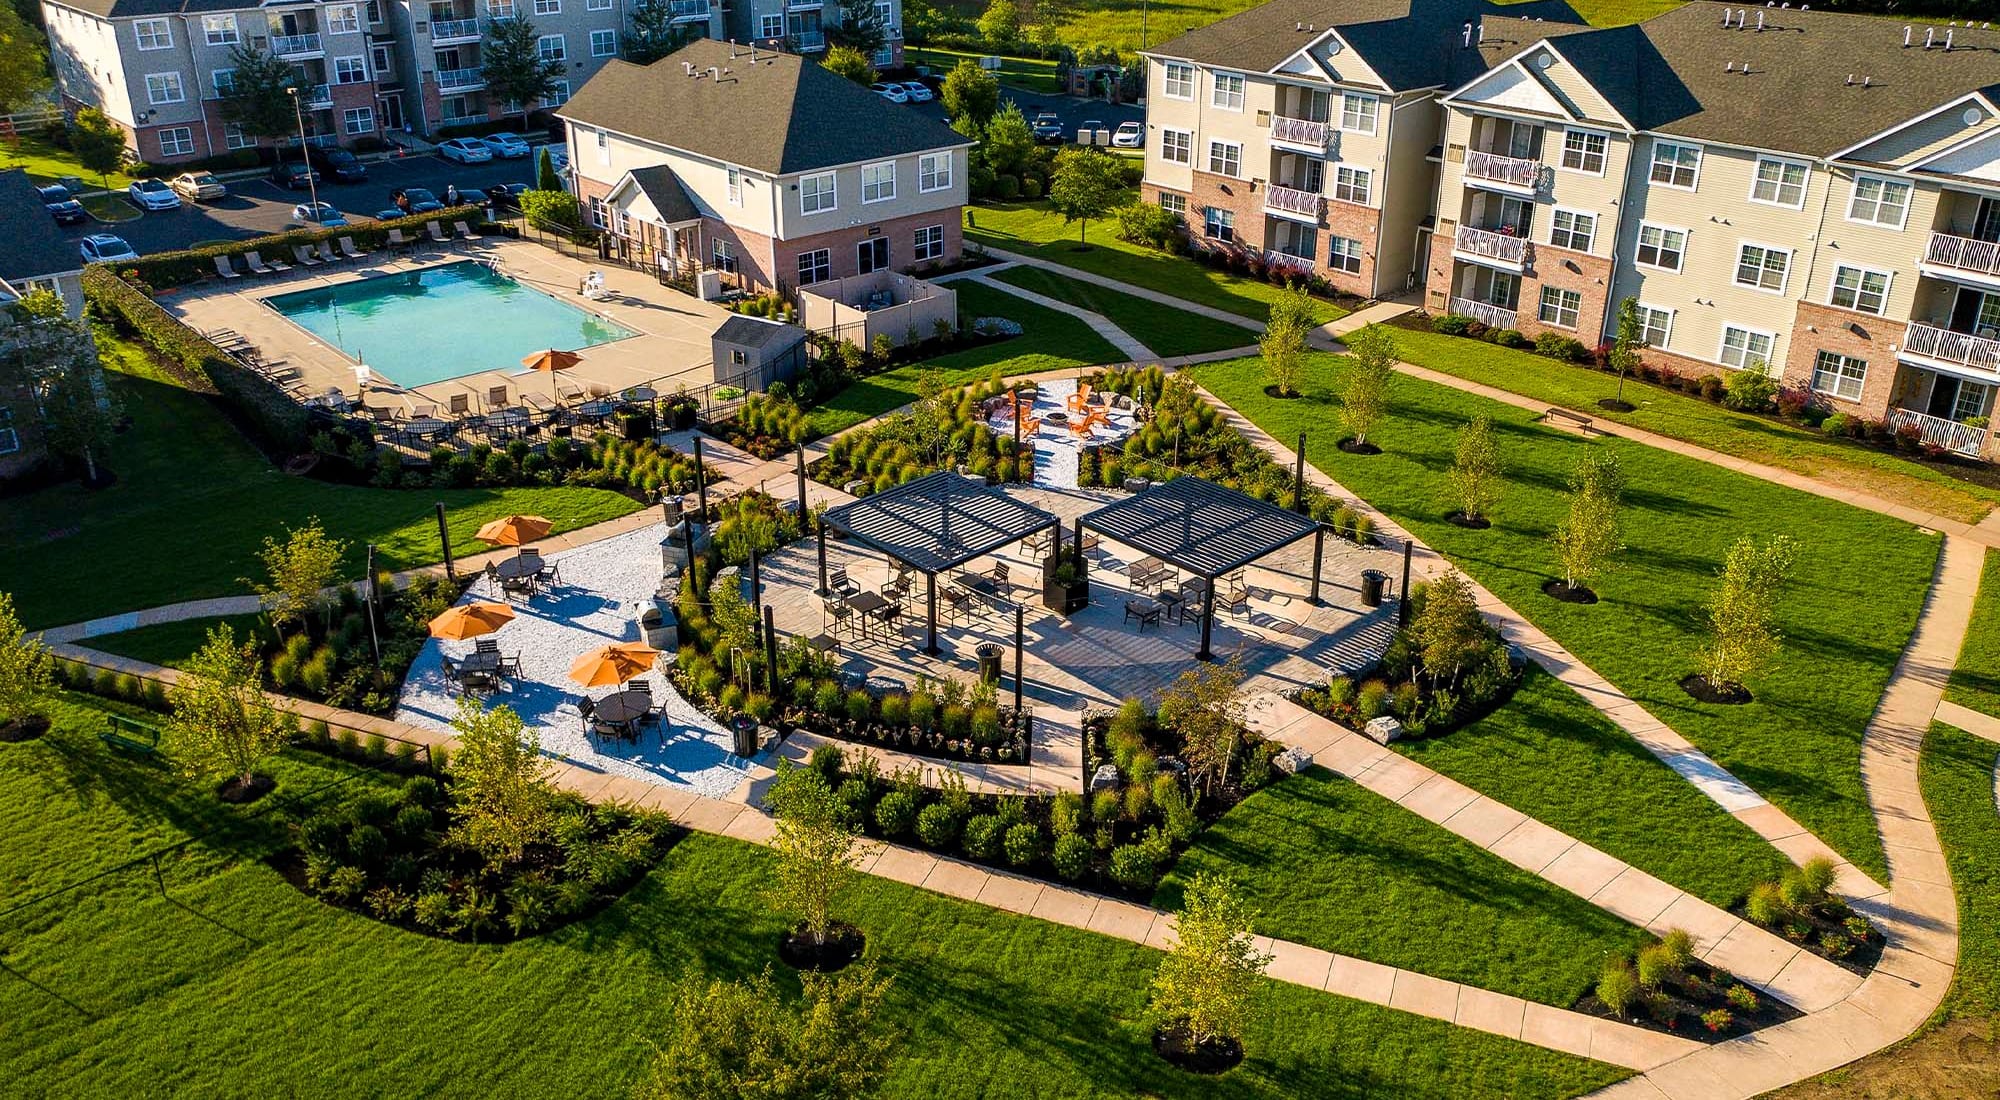 Arial view of the apartments at Aspen Court, Piscataway, New Jersey